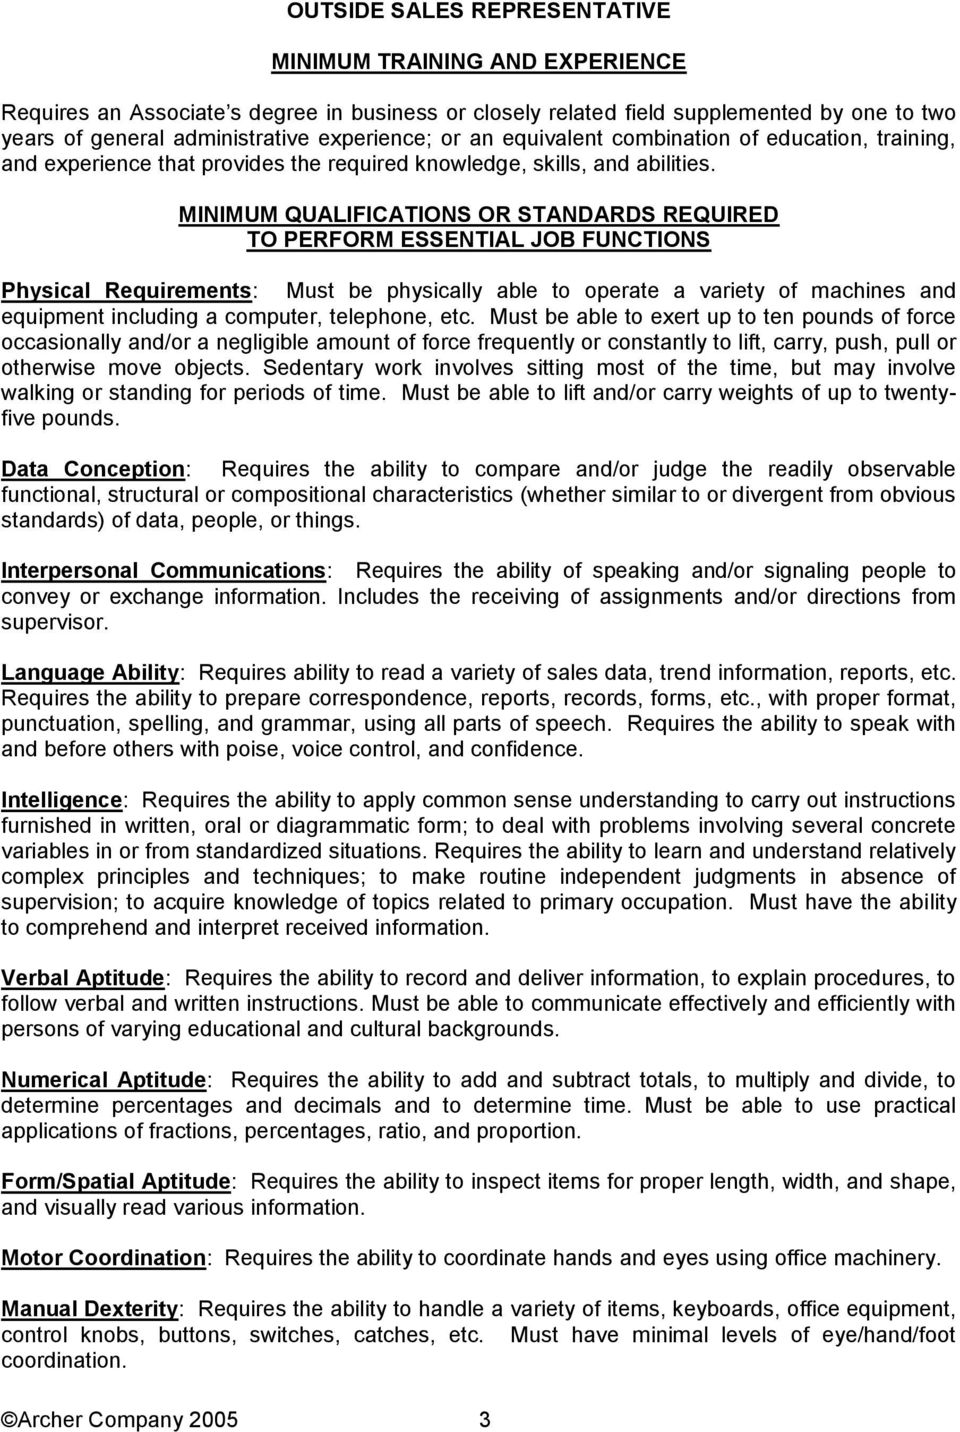 MINIMUM QUALIFICATIONS OR STANDARDS REQUIRED TO PERFORM ESSENTIAL JOB FUNCTIONS Physical Requirements: Must be physically able to operate a variety of machines and equipment including a computer,